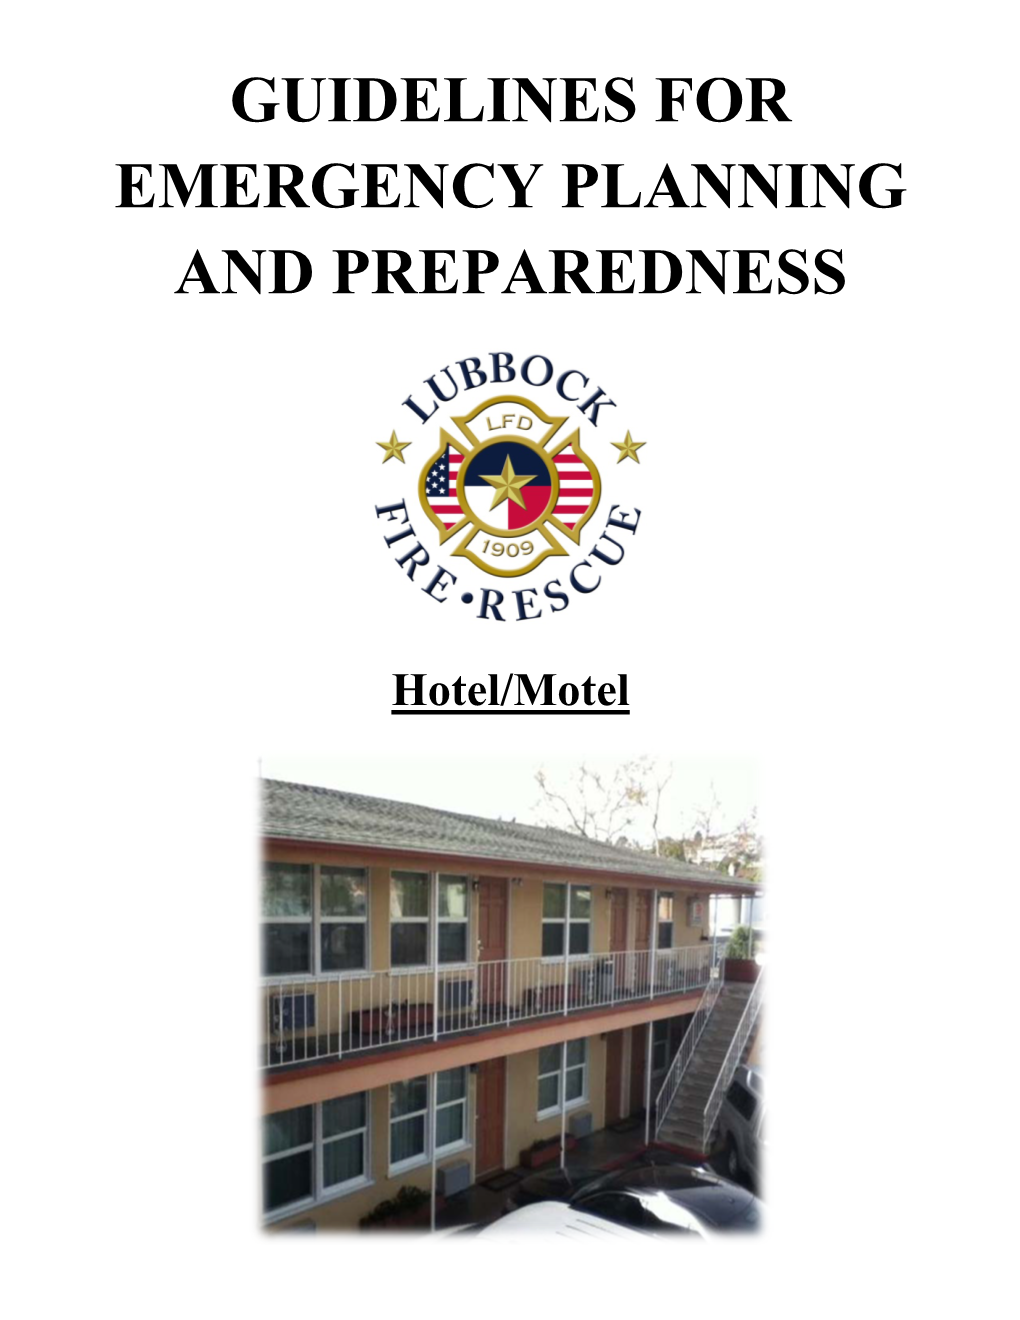 Guidelines for Emergency Planning and Preparedness